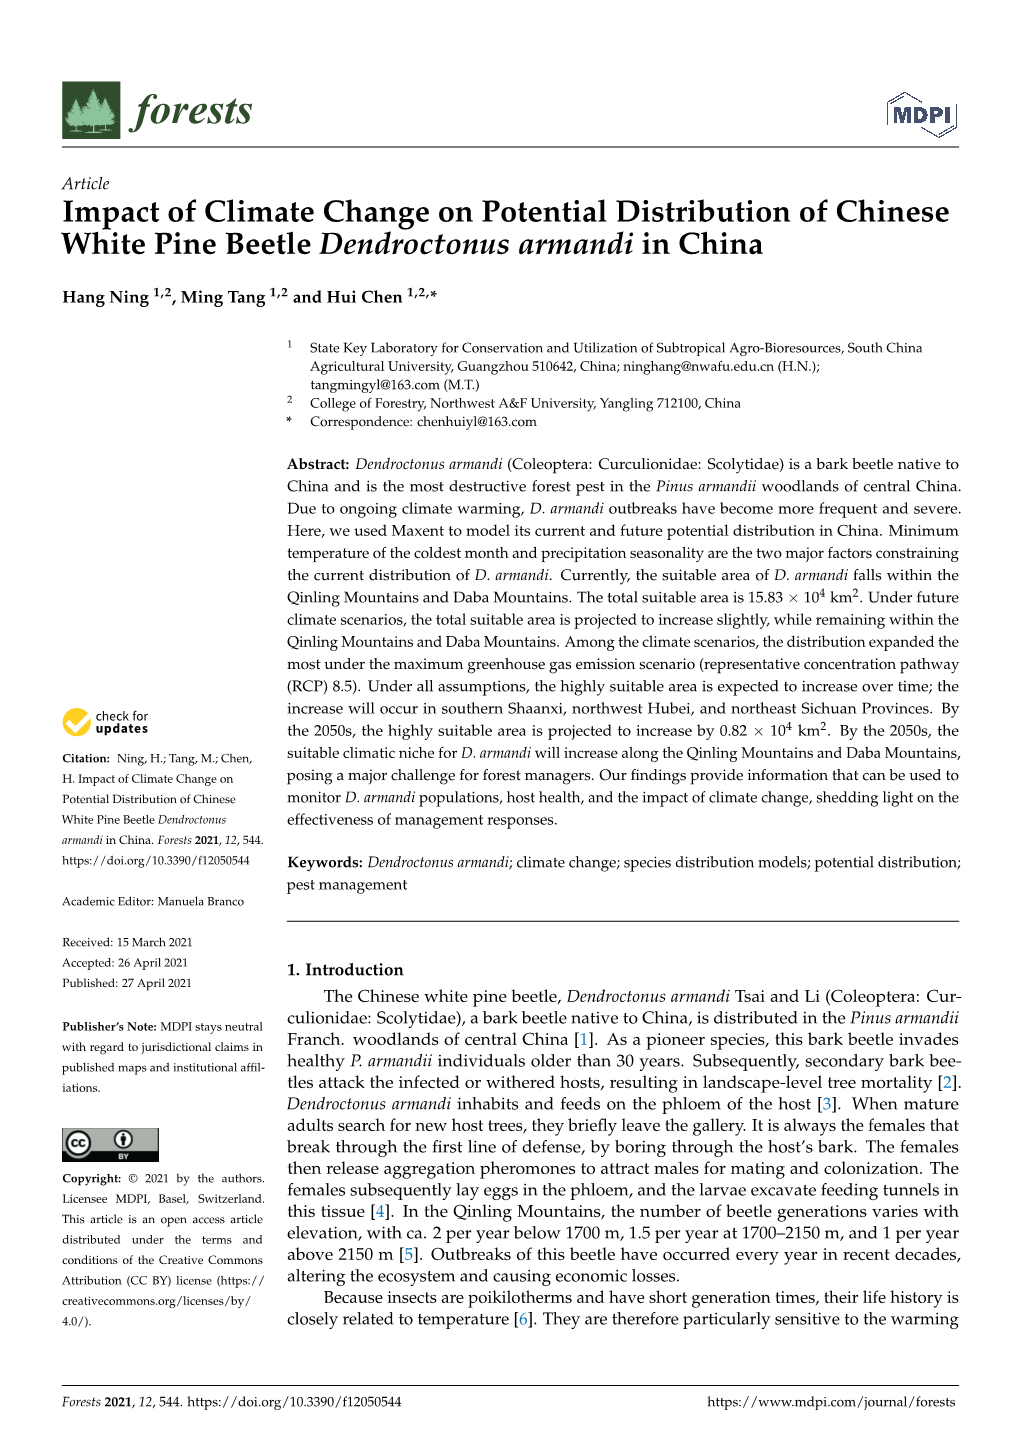 Impact of Climate Change on Potential Distribution of Chinese White Pine Beetle Dendroctonus Armandi in China